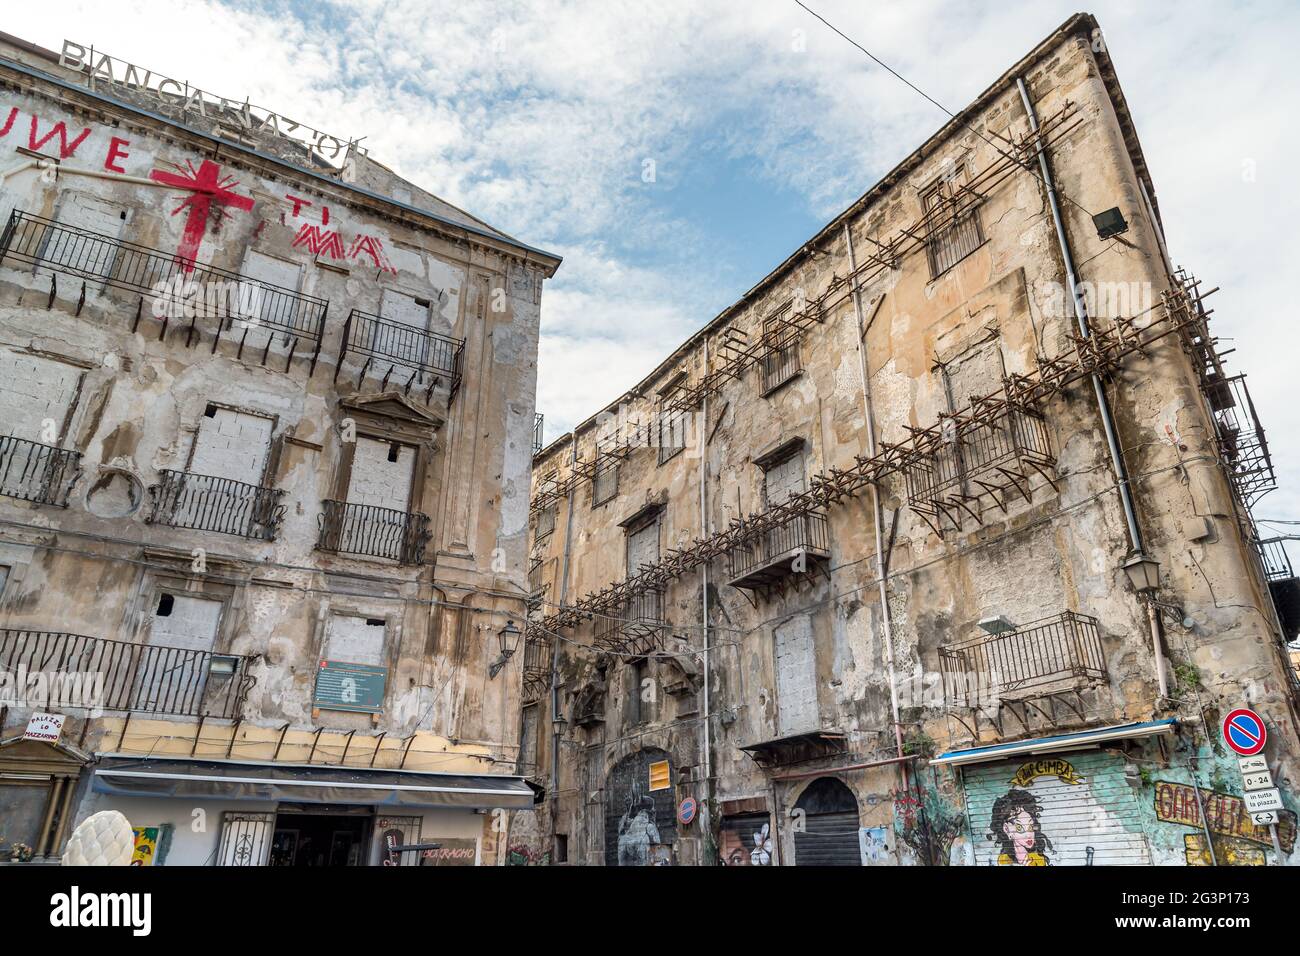 Palermo, Sicily, Italy - October 5, 2017: The Garraffello square with decaying buildings painted with murals in the historic center of Palermo. Stock Photo